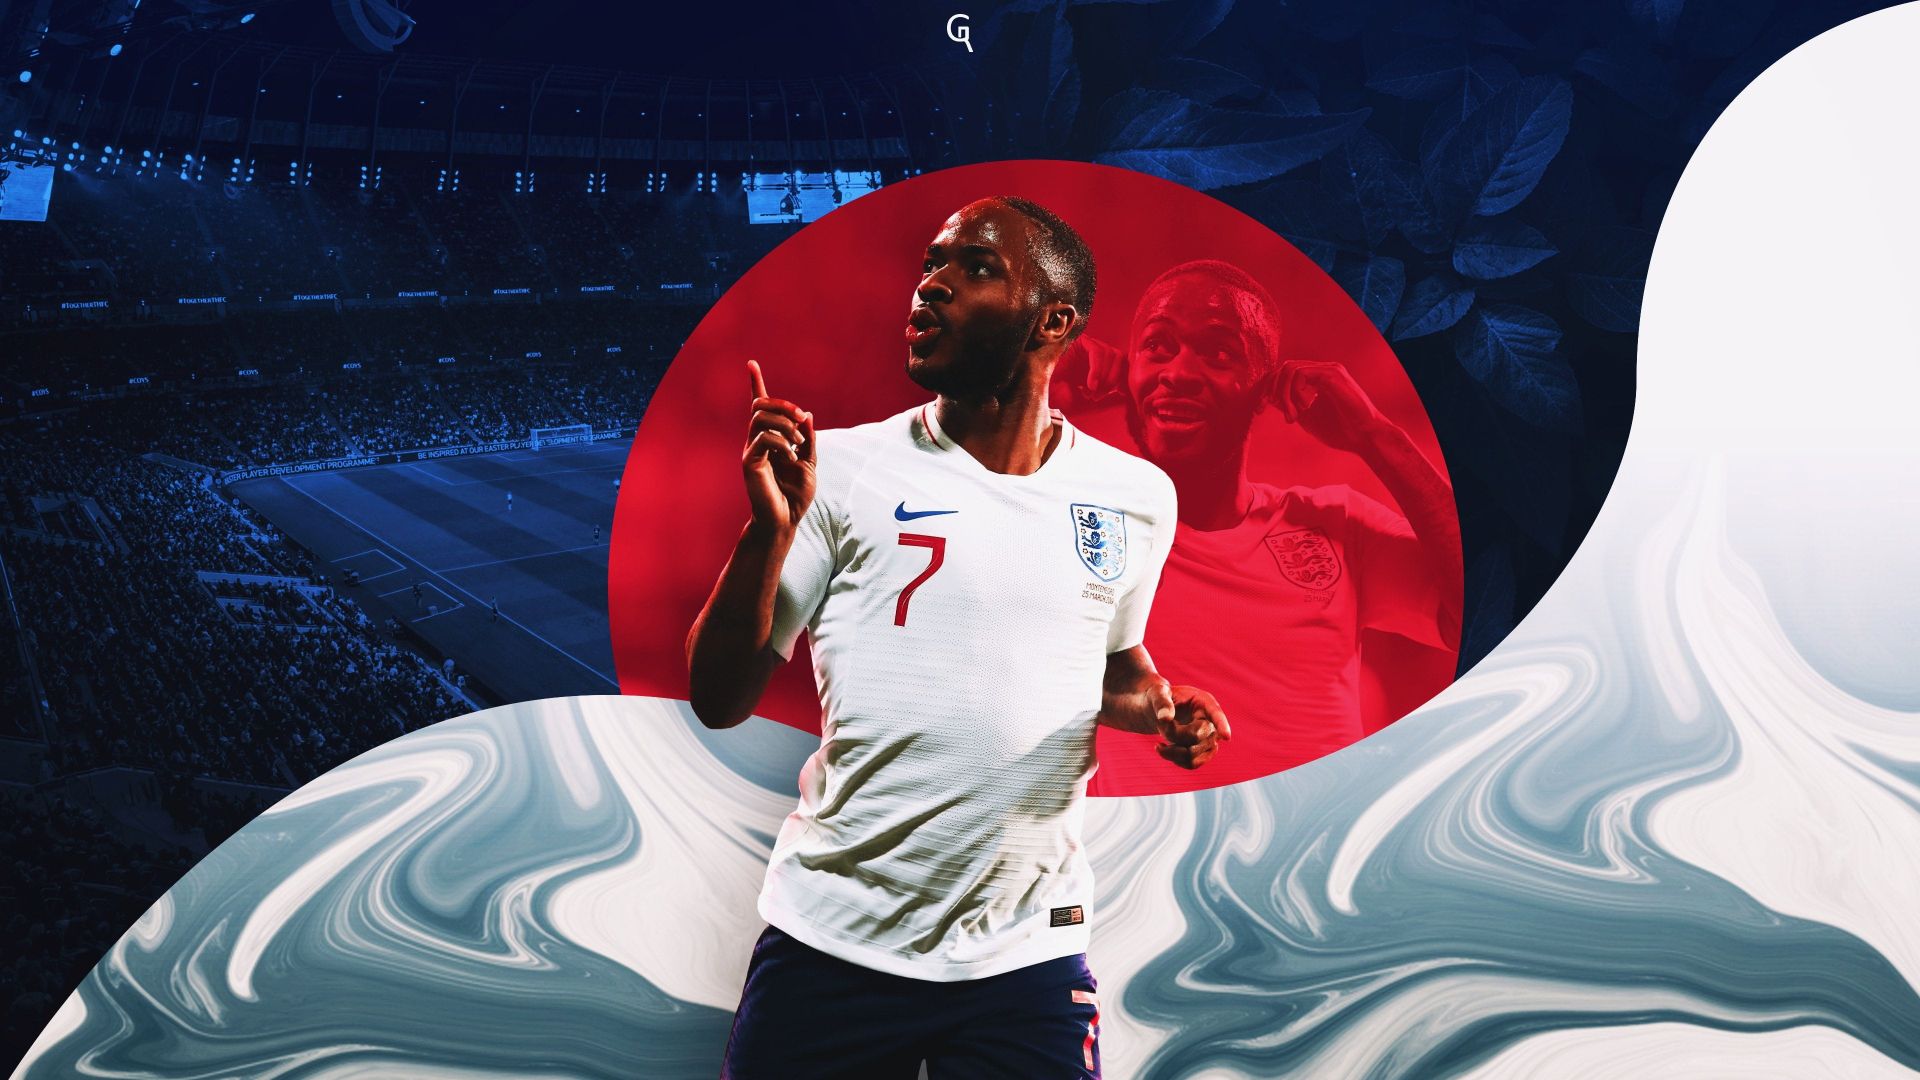 Raheem Sterling Backgrounds PC